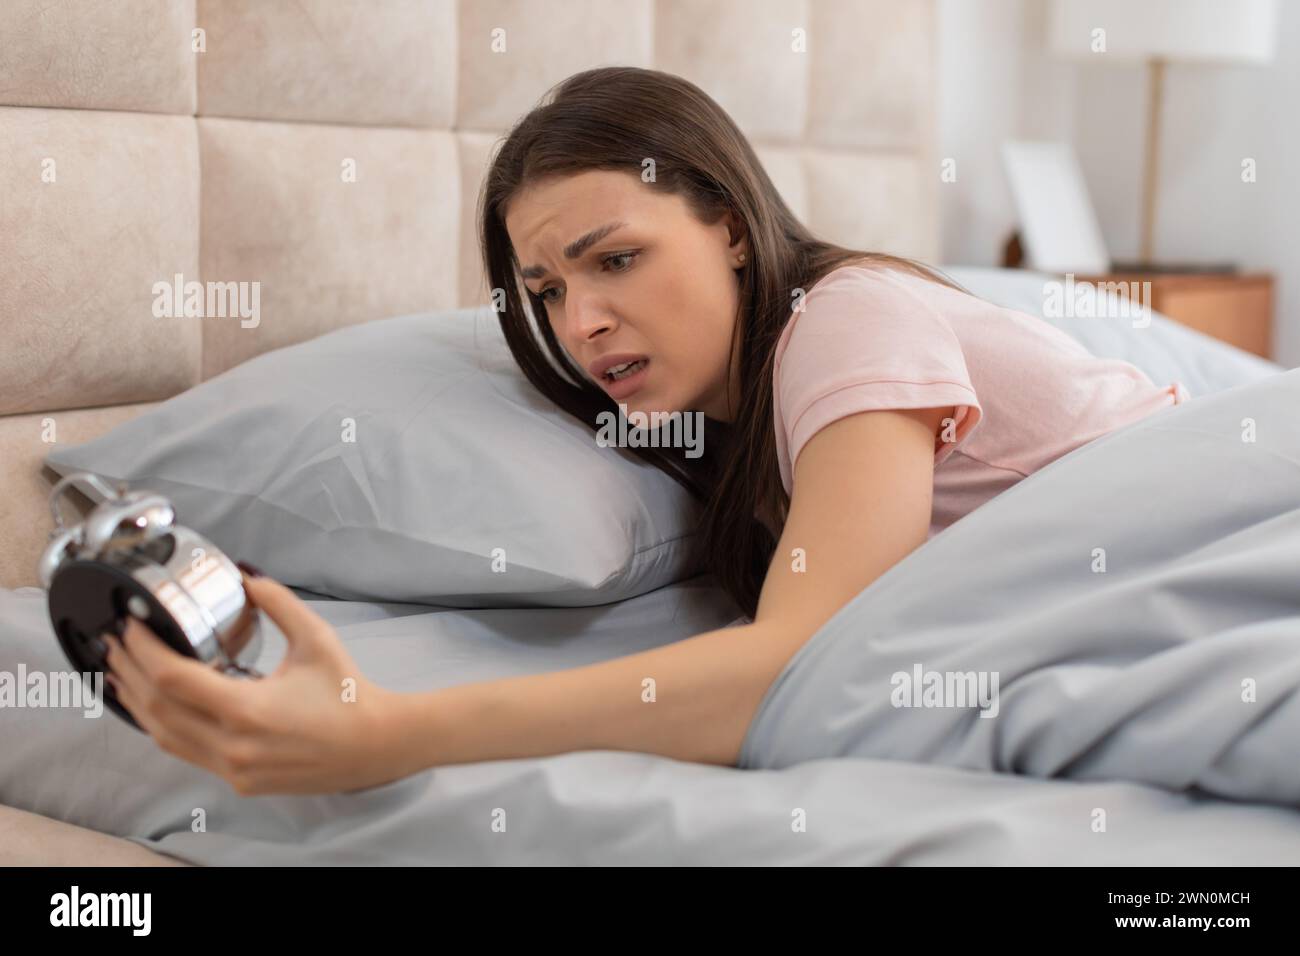 Frustrated woman waking to alarm clock noise Stock Photo